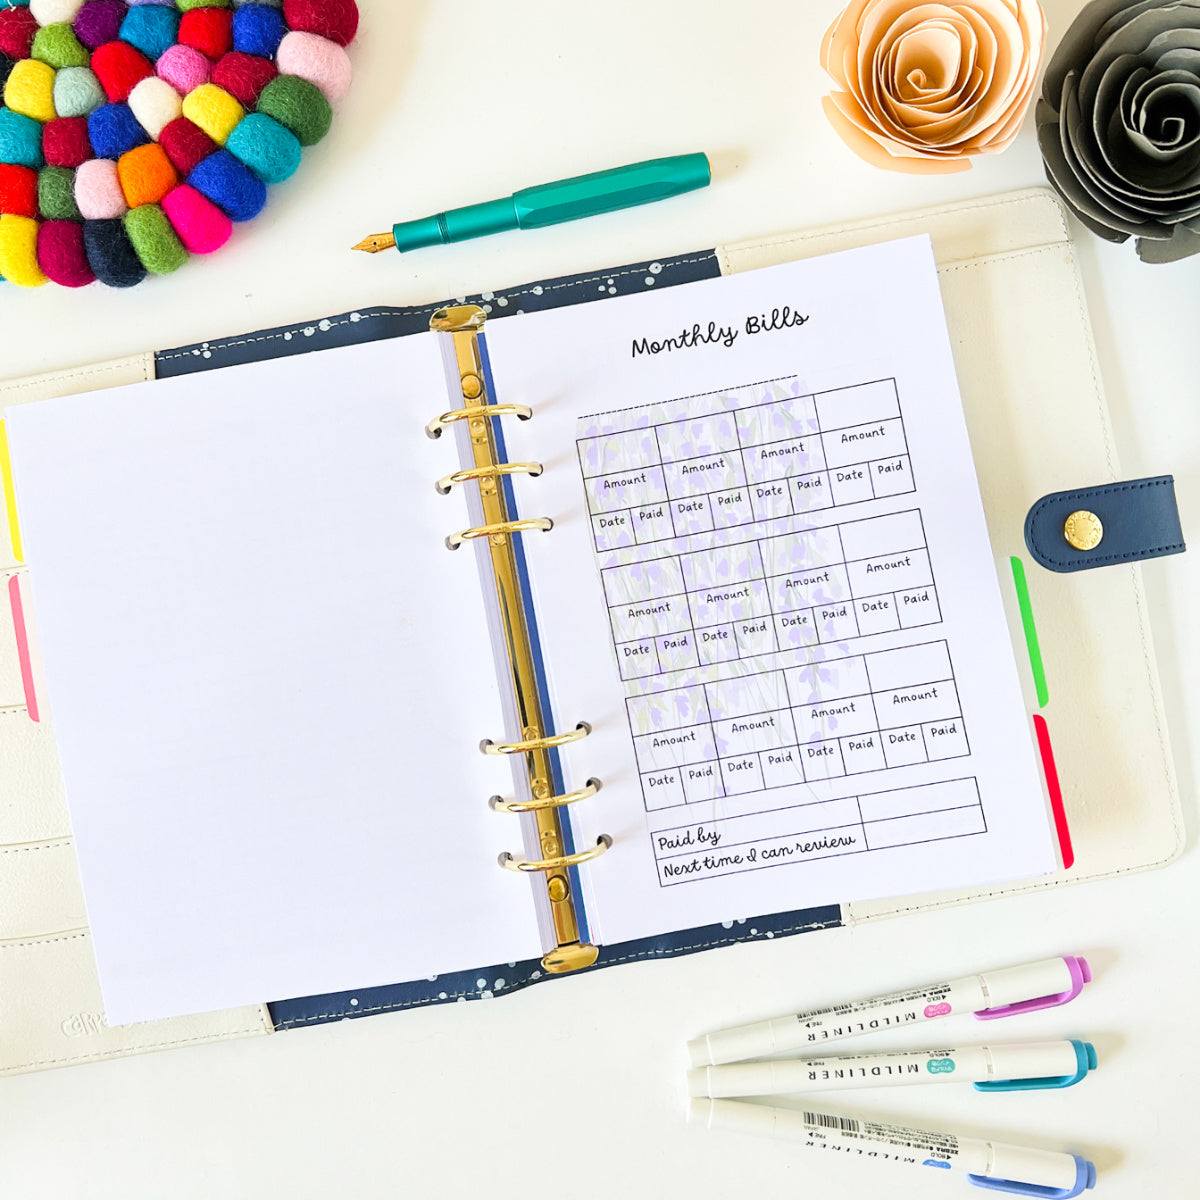 Open planner with "Monthly Bills" sheet on a desk. This Household bill tracker features a six-ring binder holding pages for dates, amounts, and descriptions—perfect for bill tracking. Surrounding it are multicolored pom-pom coaster, pink and yellow flowers, green pen, and pastel-colored highlighters.